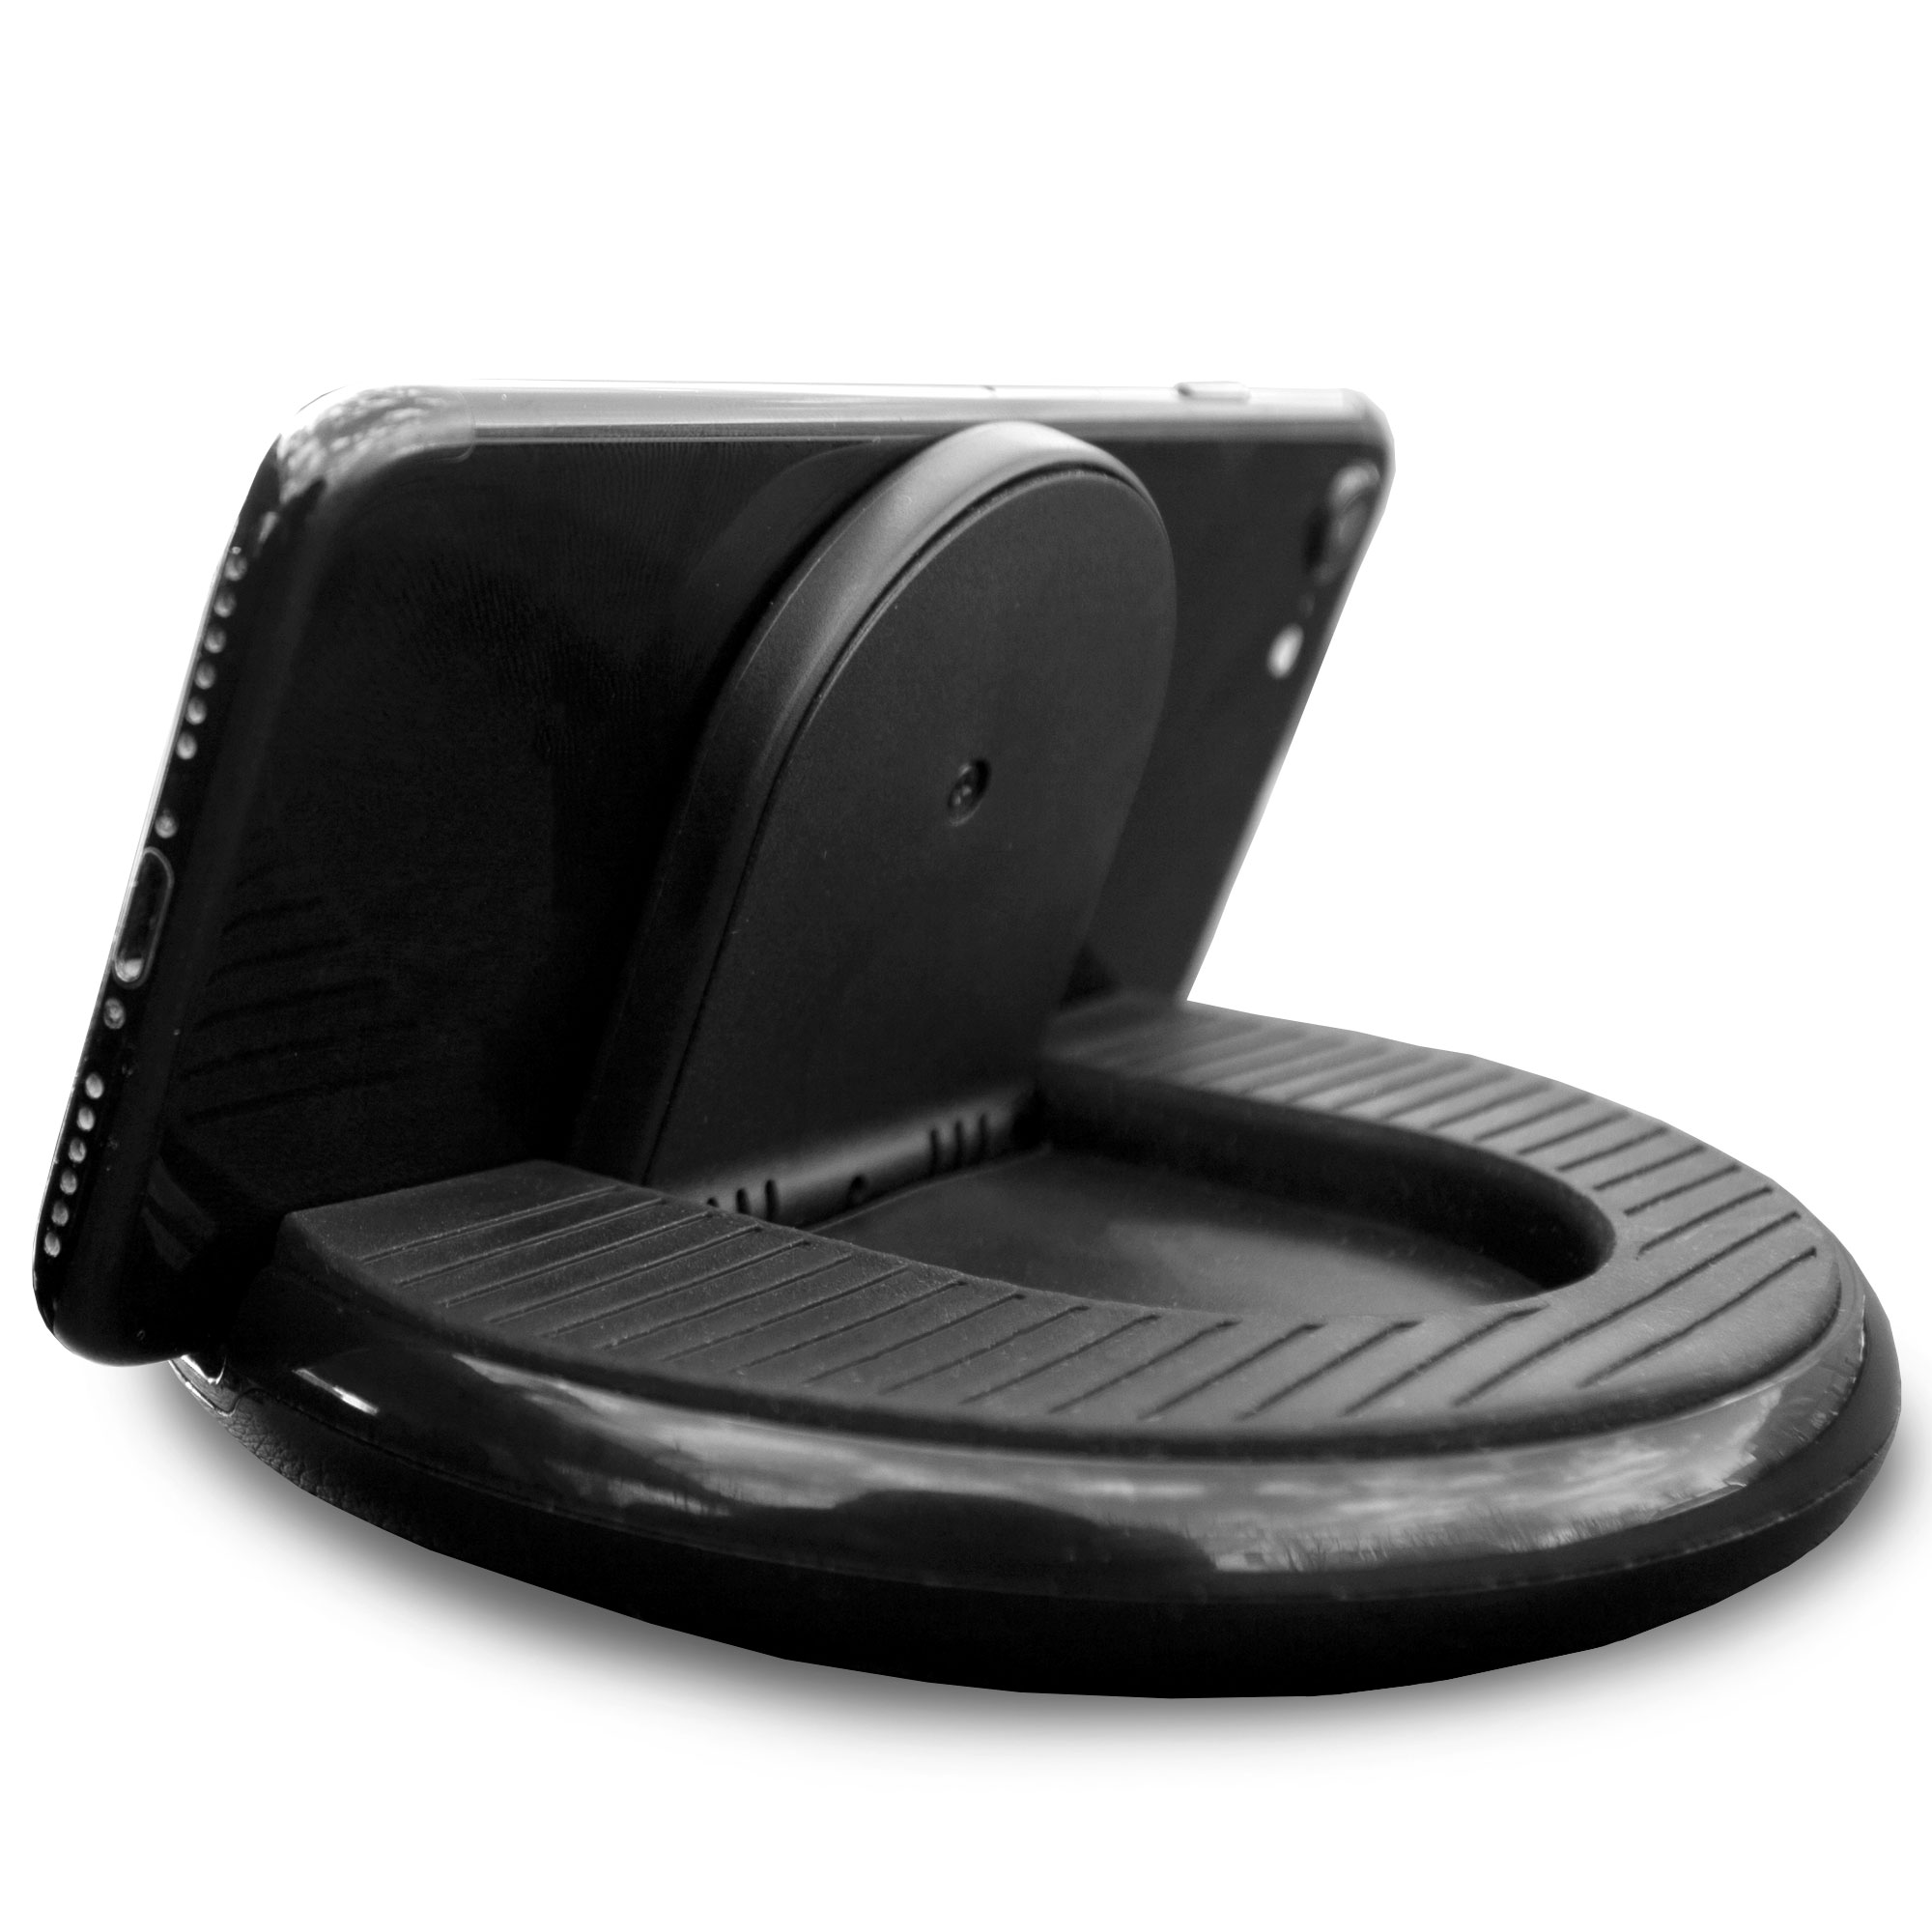 FH Group Wireless Charging Dock Station Stand Holder for Multi-Use for Smartphone, iPhone, Galaxy and Other devices - image 5 of 5